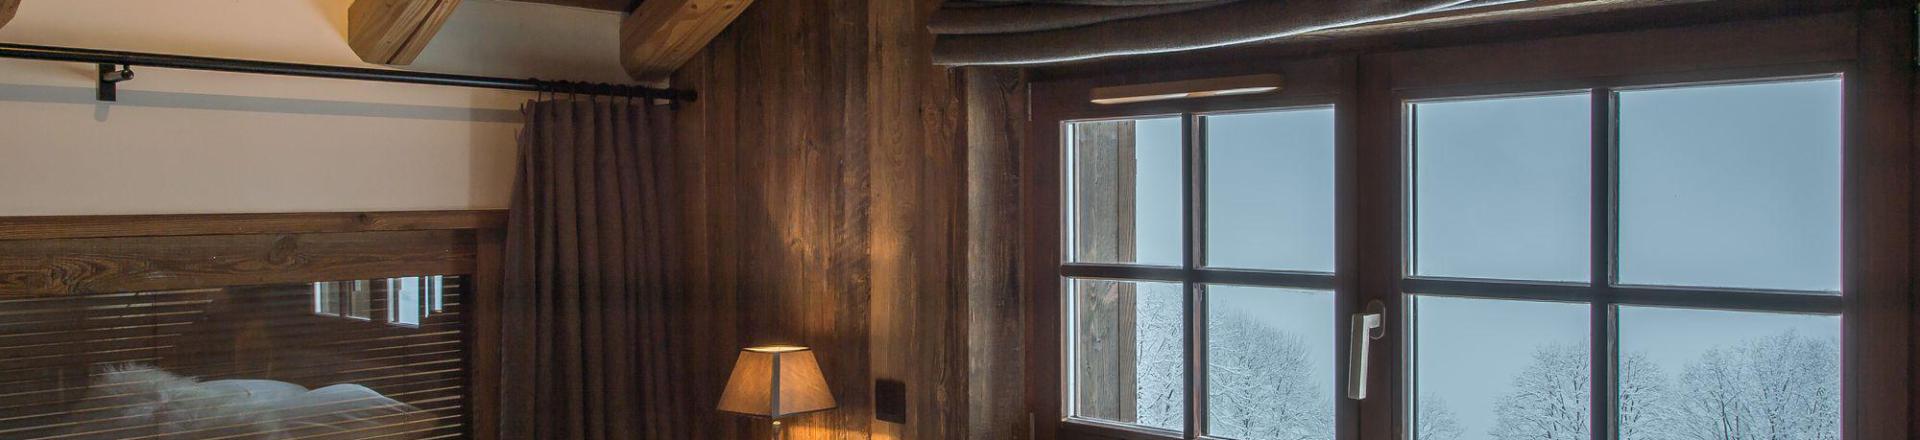 Holiday in mountain resort 6 room quadriplex chalet 10 people - Chalet le Refuge - Méribel - Accommodation